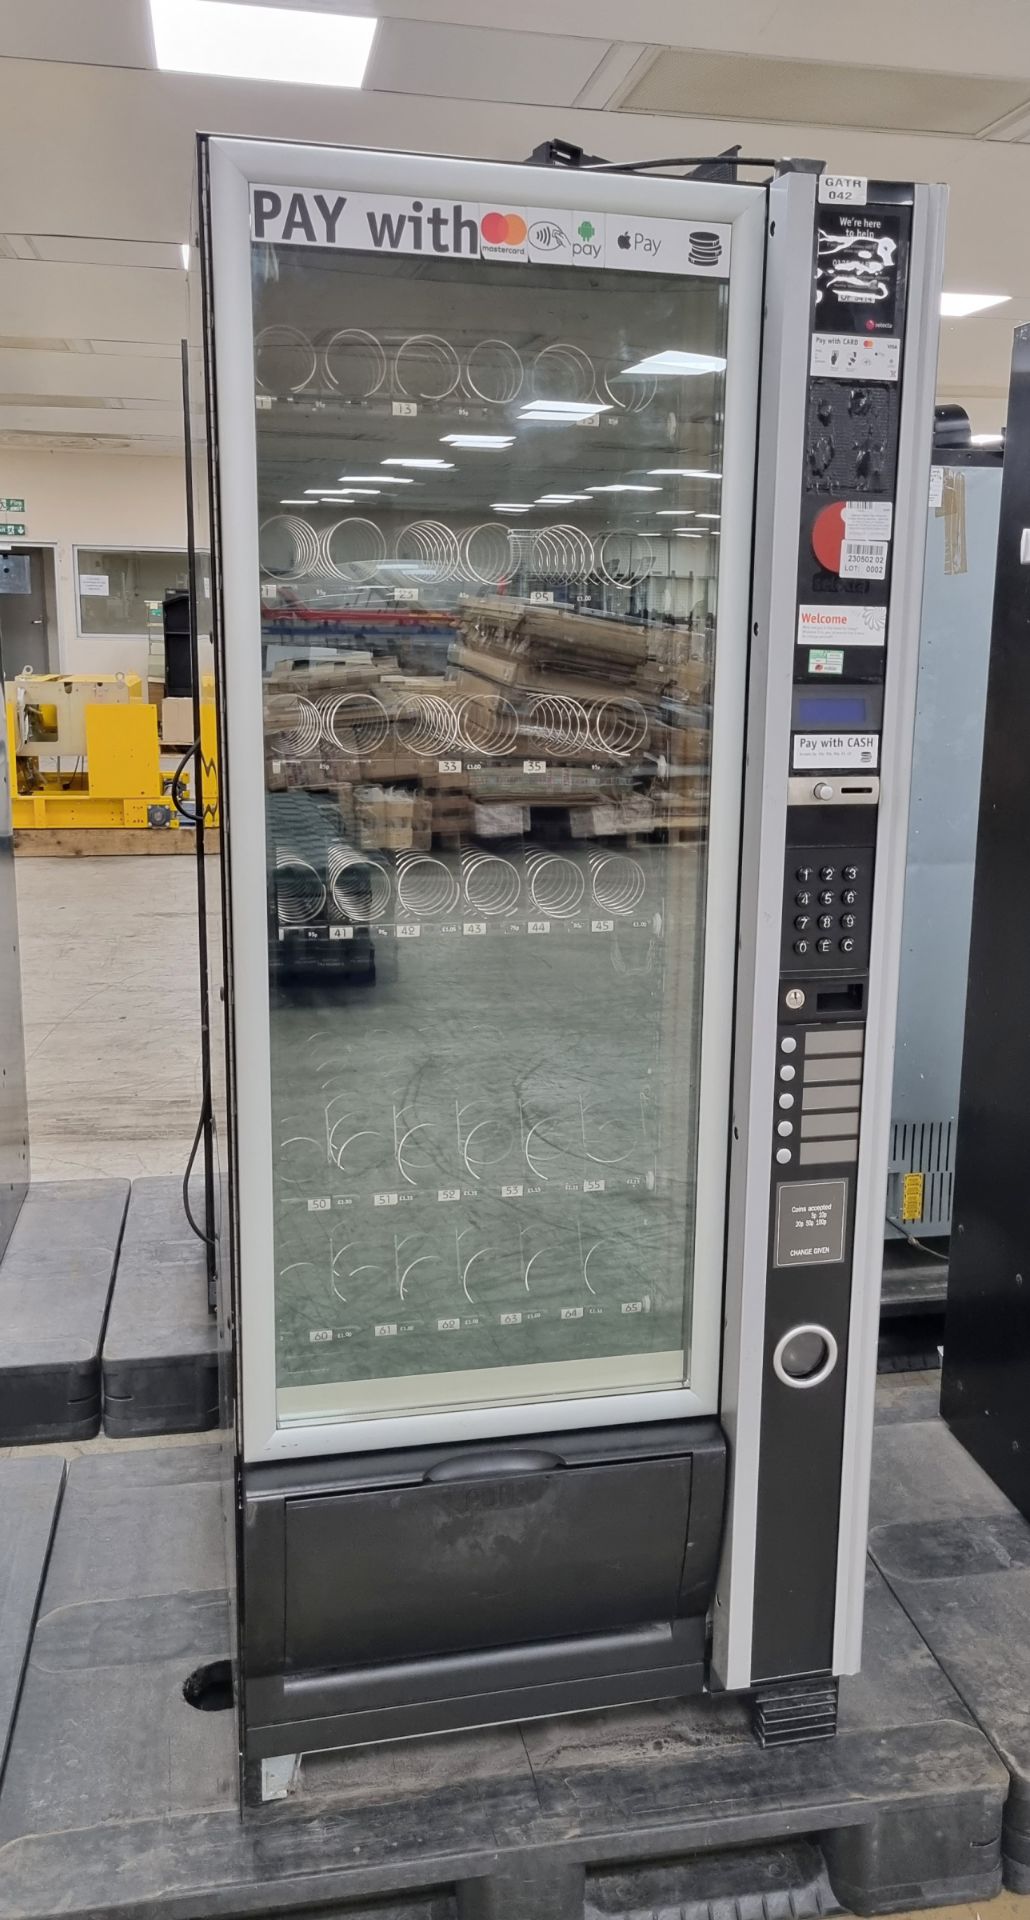 Selecta Snakky Max drinks and snacks vending machine